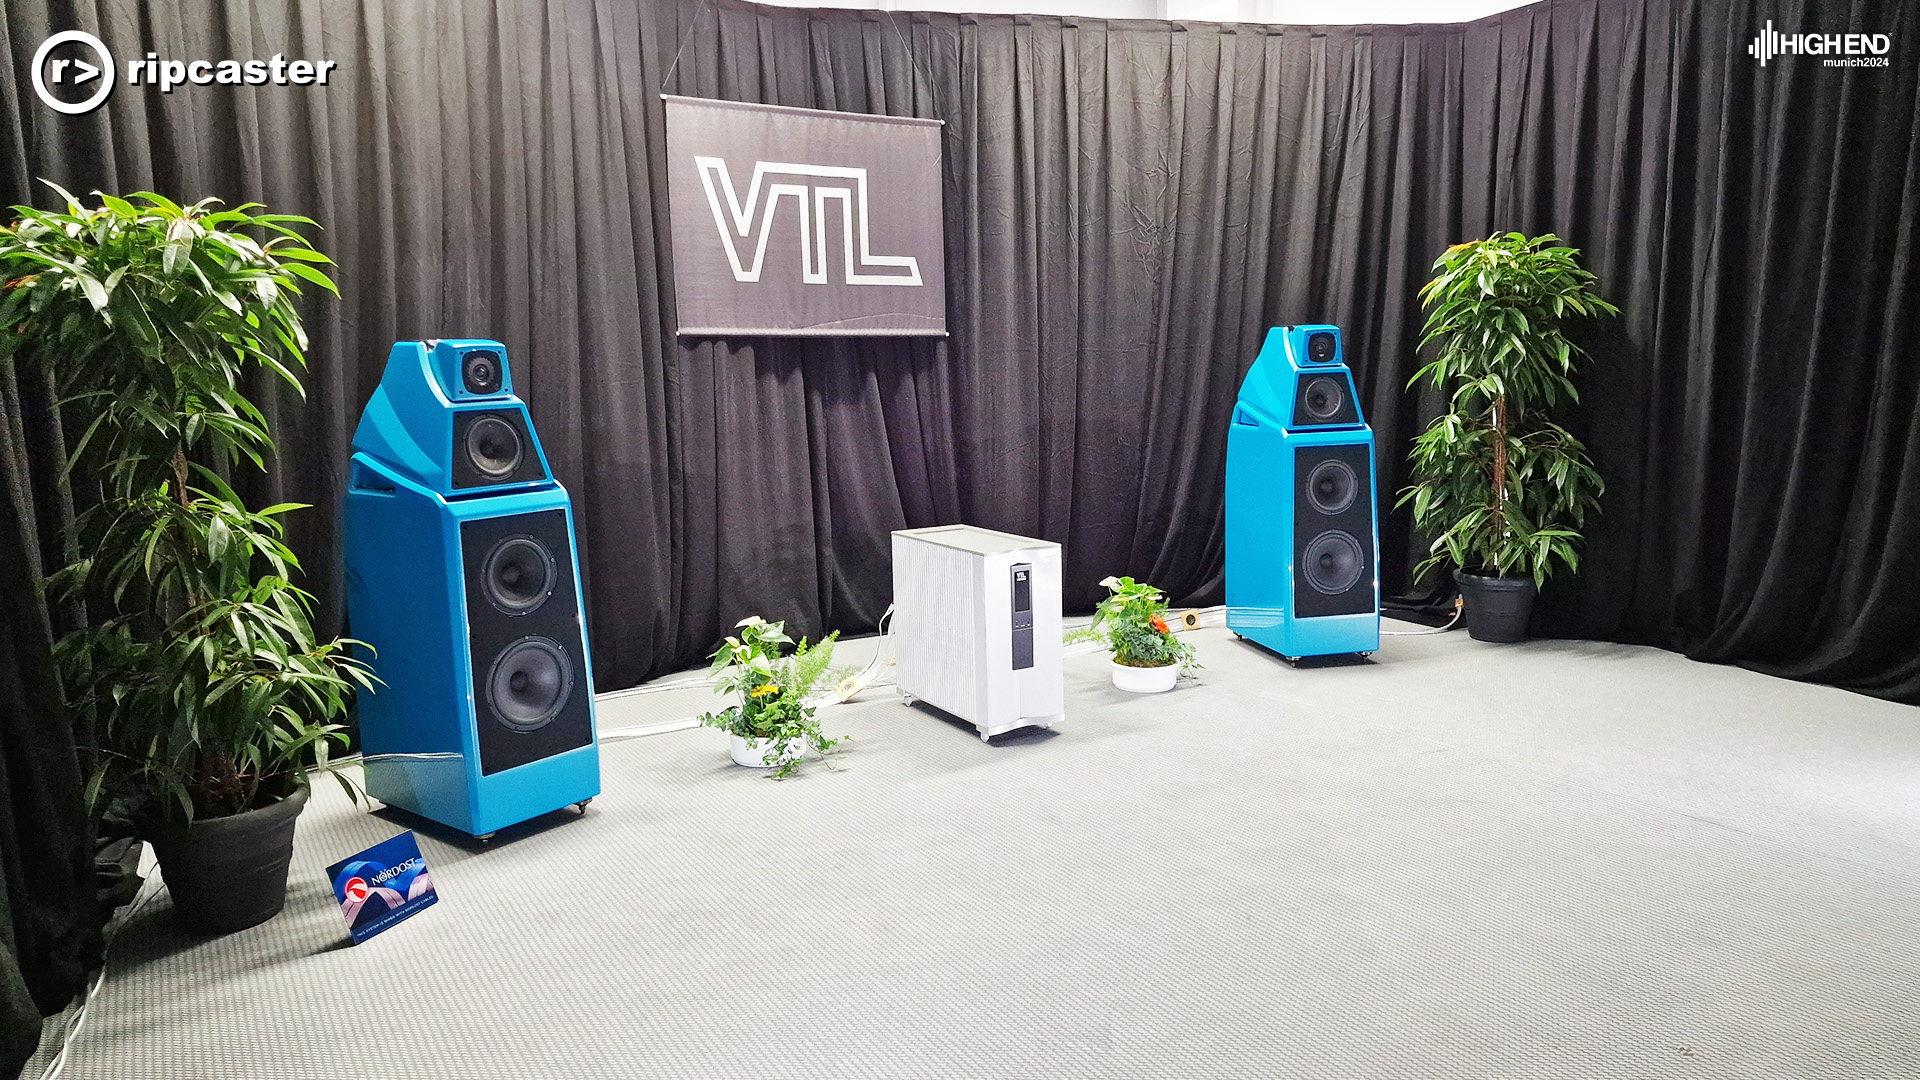 VTL blue floorstanding speakers with black curtains behind and tall plants either side of the speakers